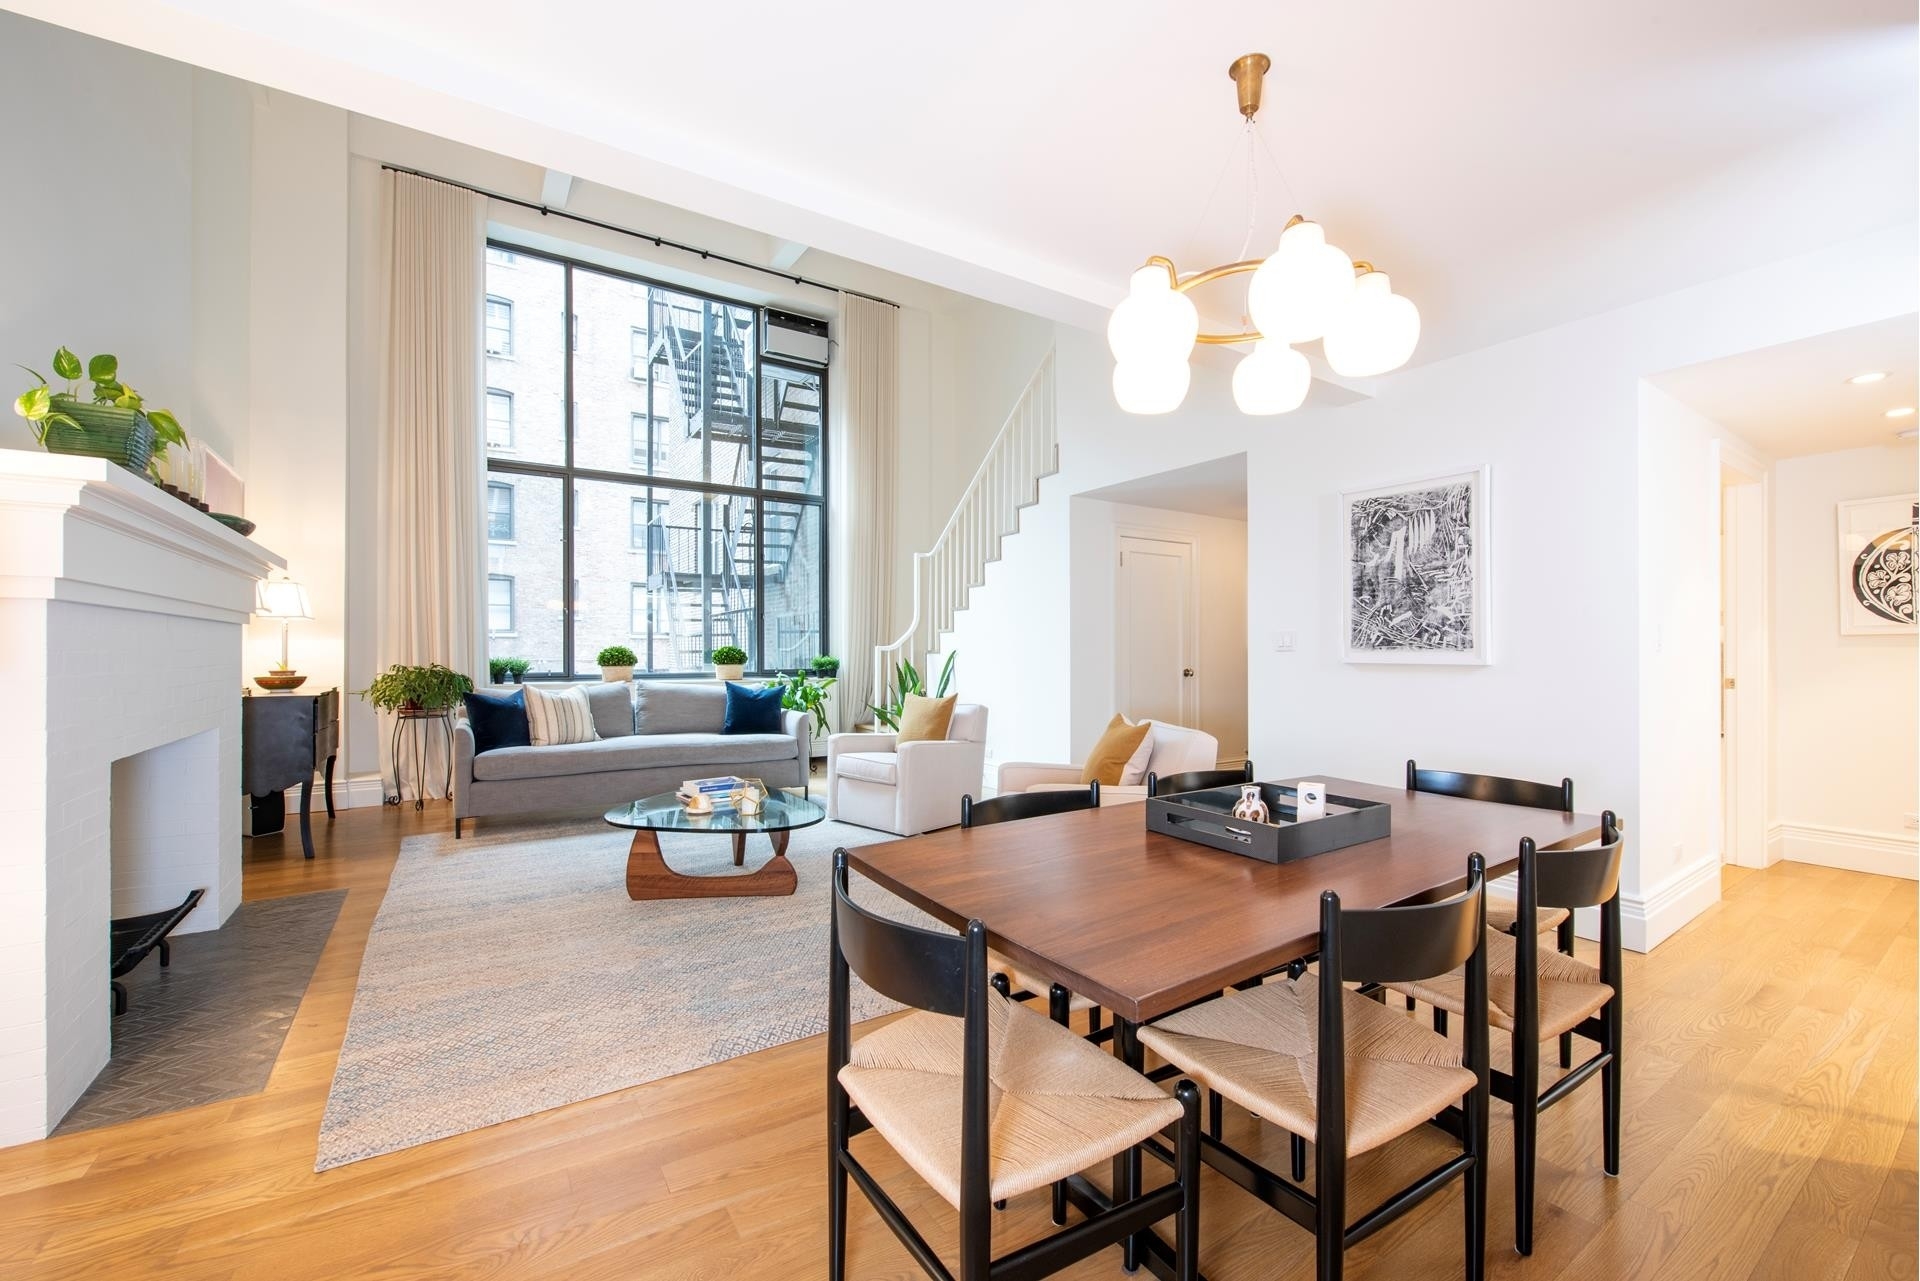 Co-op Properties for Sale at Colonial Studios, 39 W 67TH ST, 302 Lincoln Square, New York, NY 10023